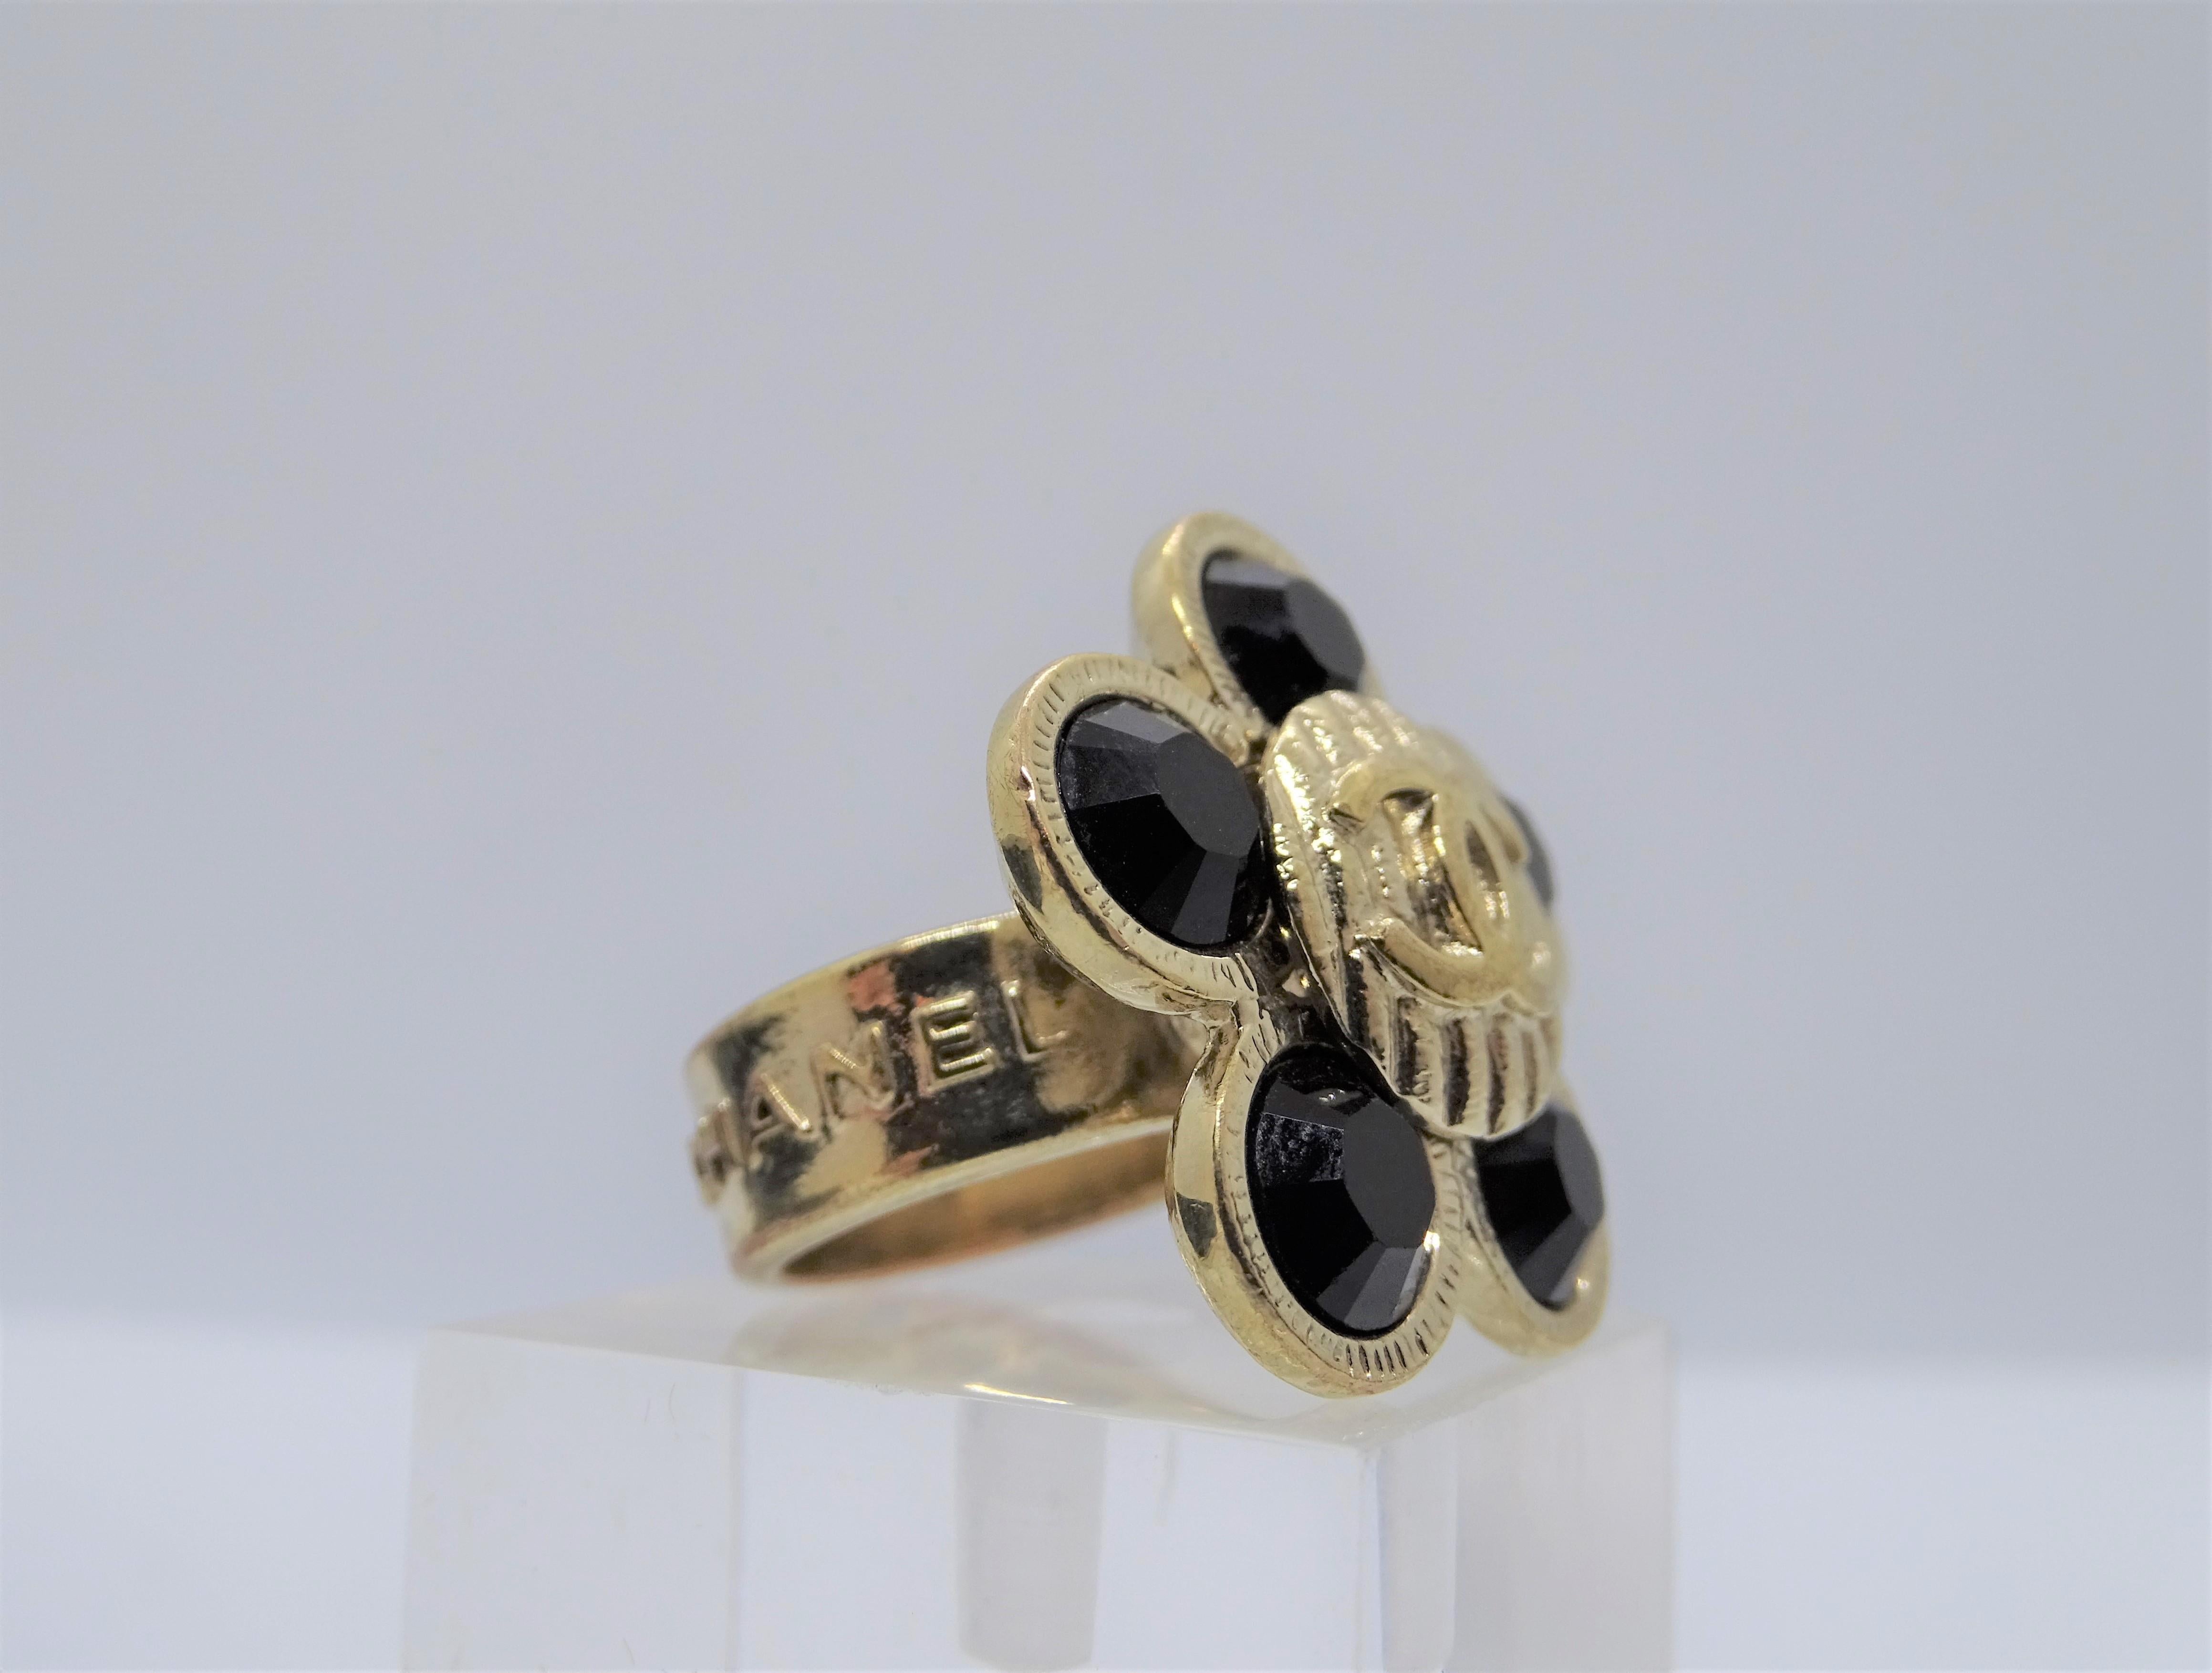 Gorgous Coco Chanel ring , gold plate and diamond cut black crystal , Camellia shape. Its the iconic flower from the prestigious French Maison Coco Chanel
With house seal!!!
This is a timeless jewel , beautiful in any occasion and a piece of very